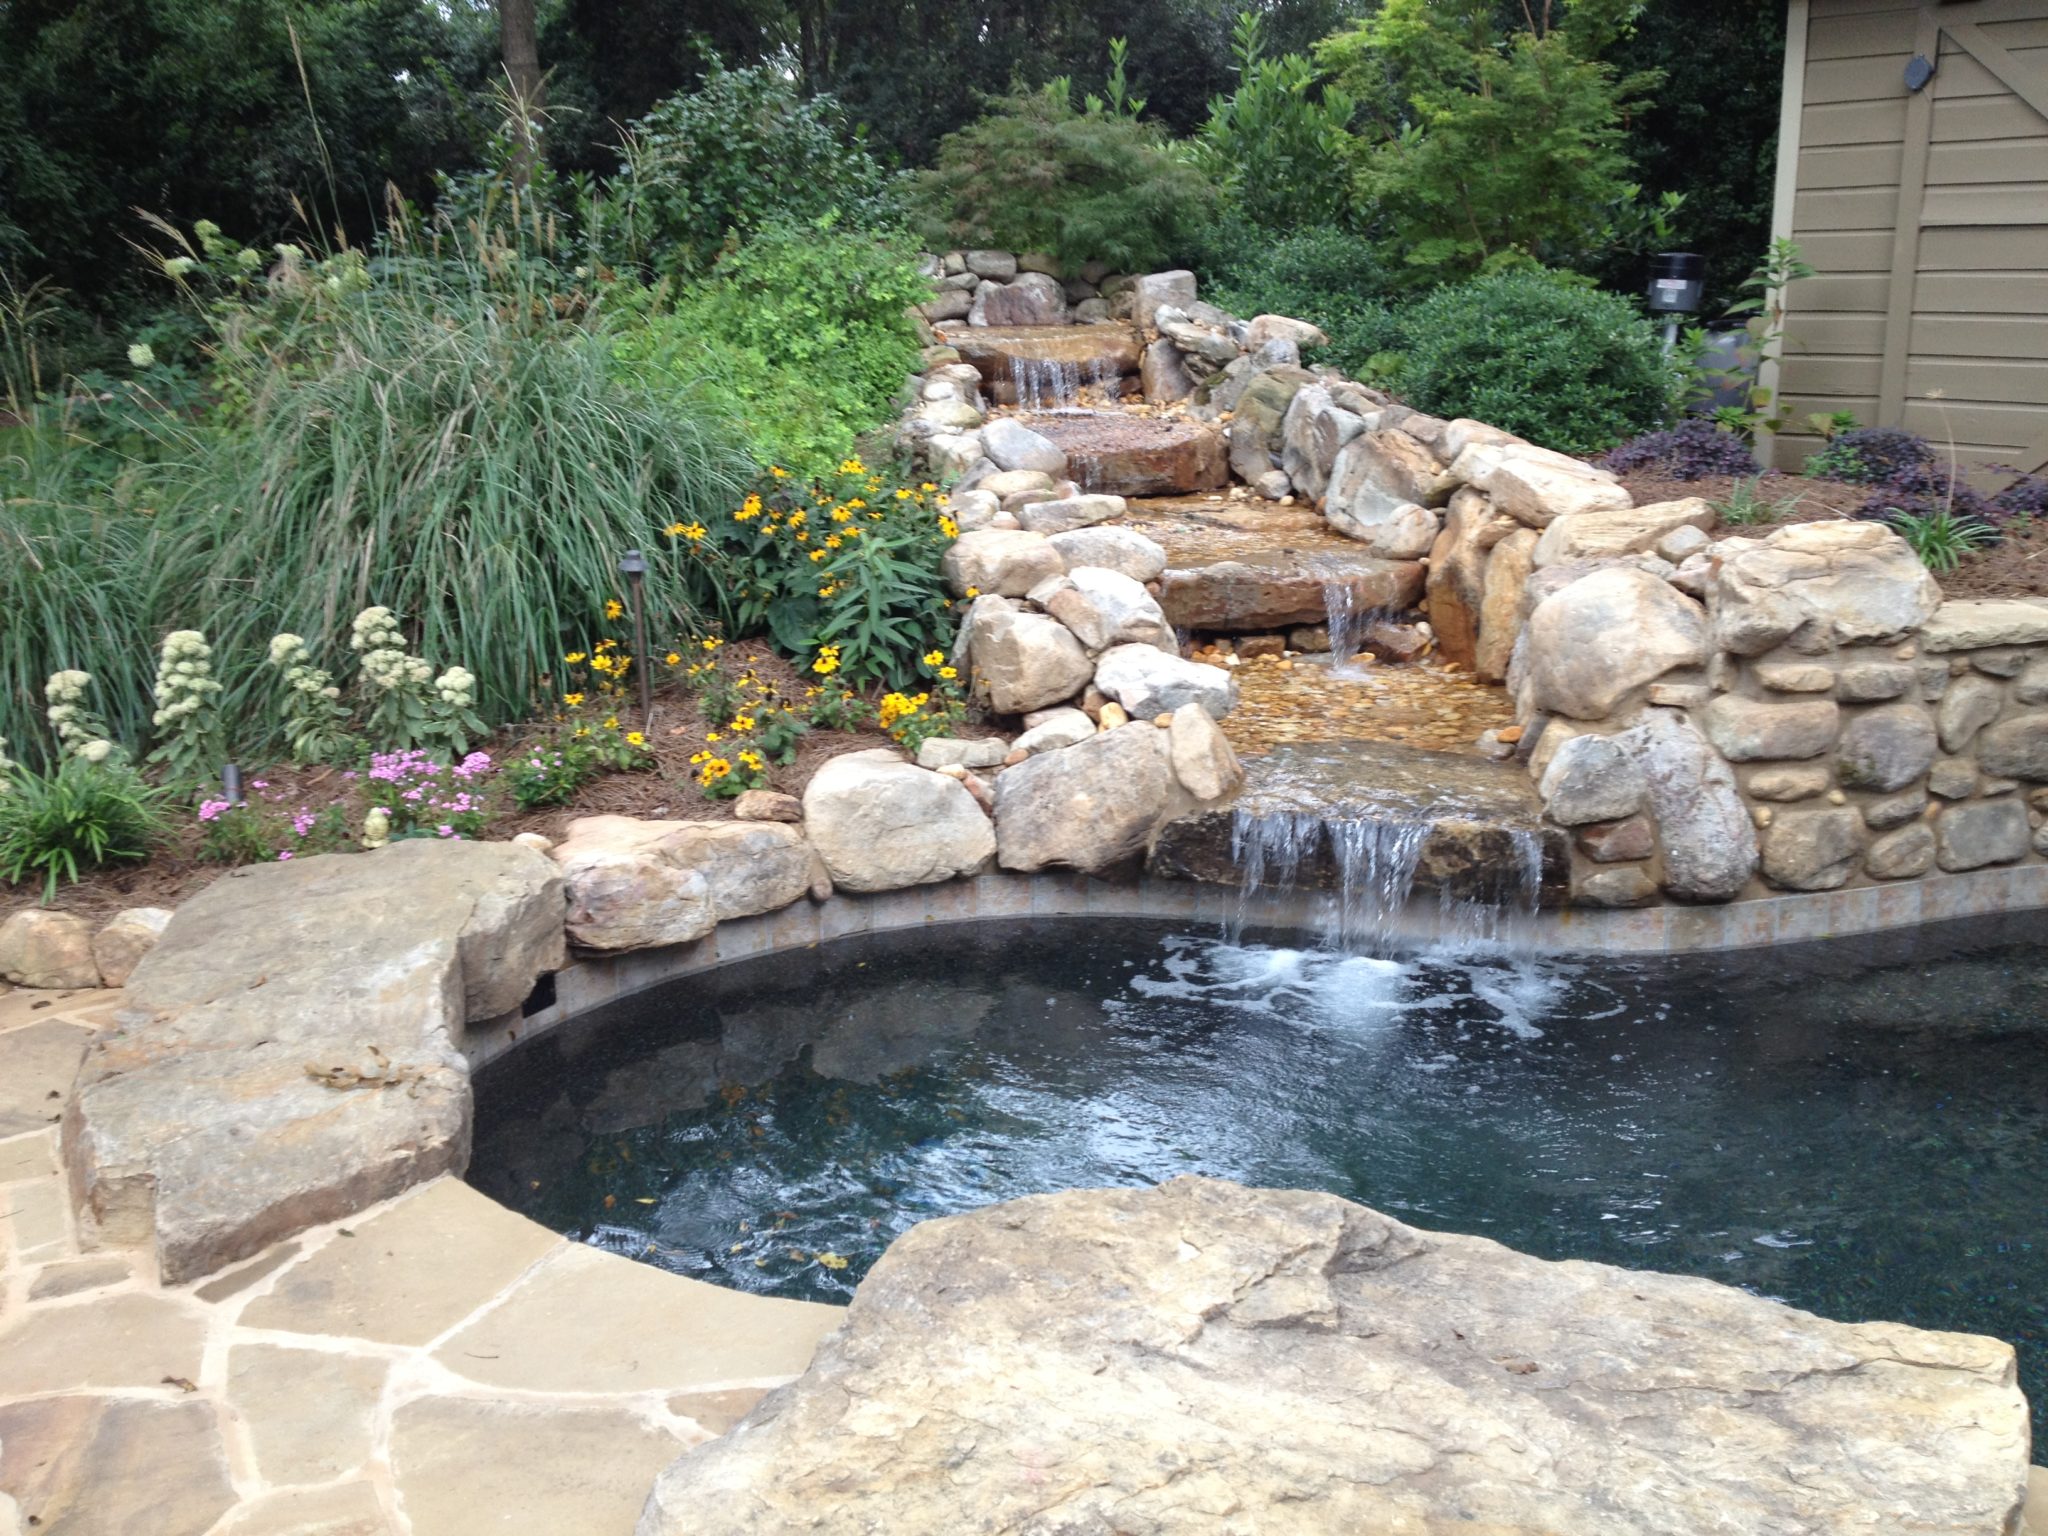 A custom four-tier boulder waterfall nestled in lush greenery.